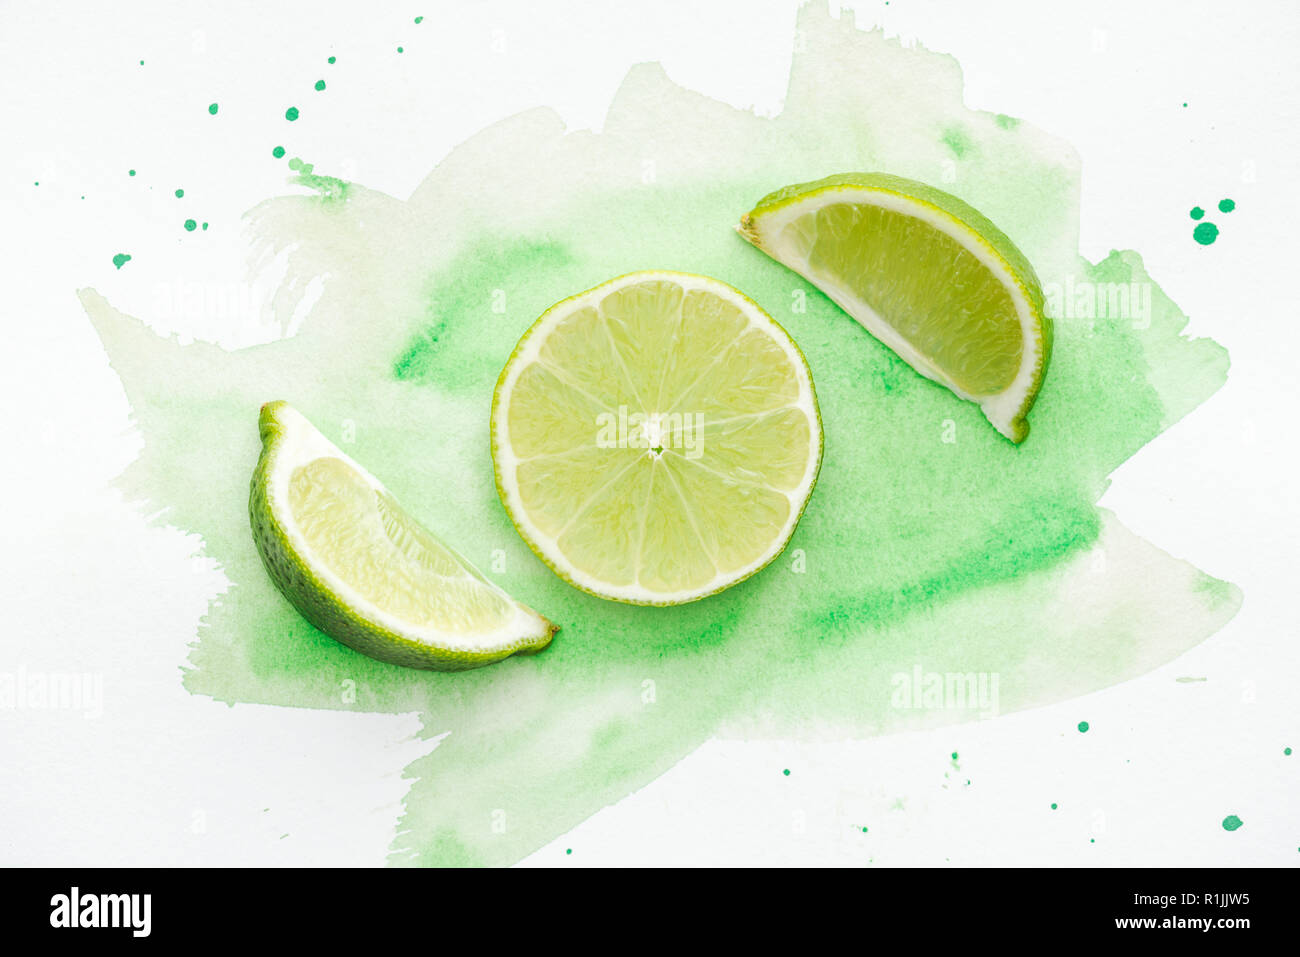 top view of pieces of green ripe limes on white surface with green watercolor Stock Photo